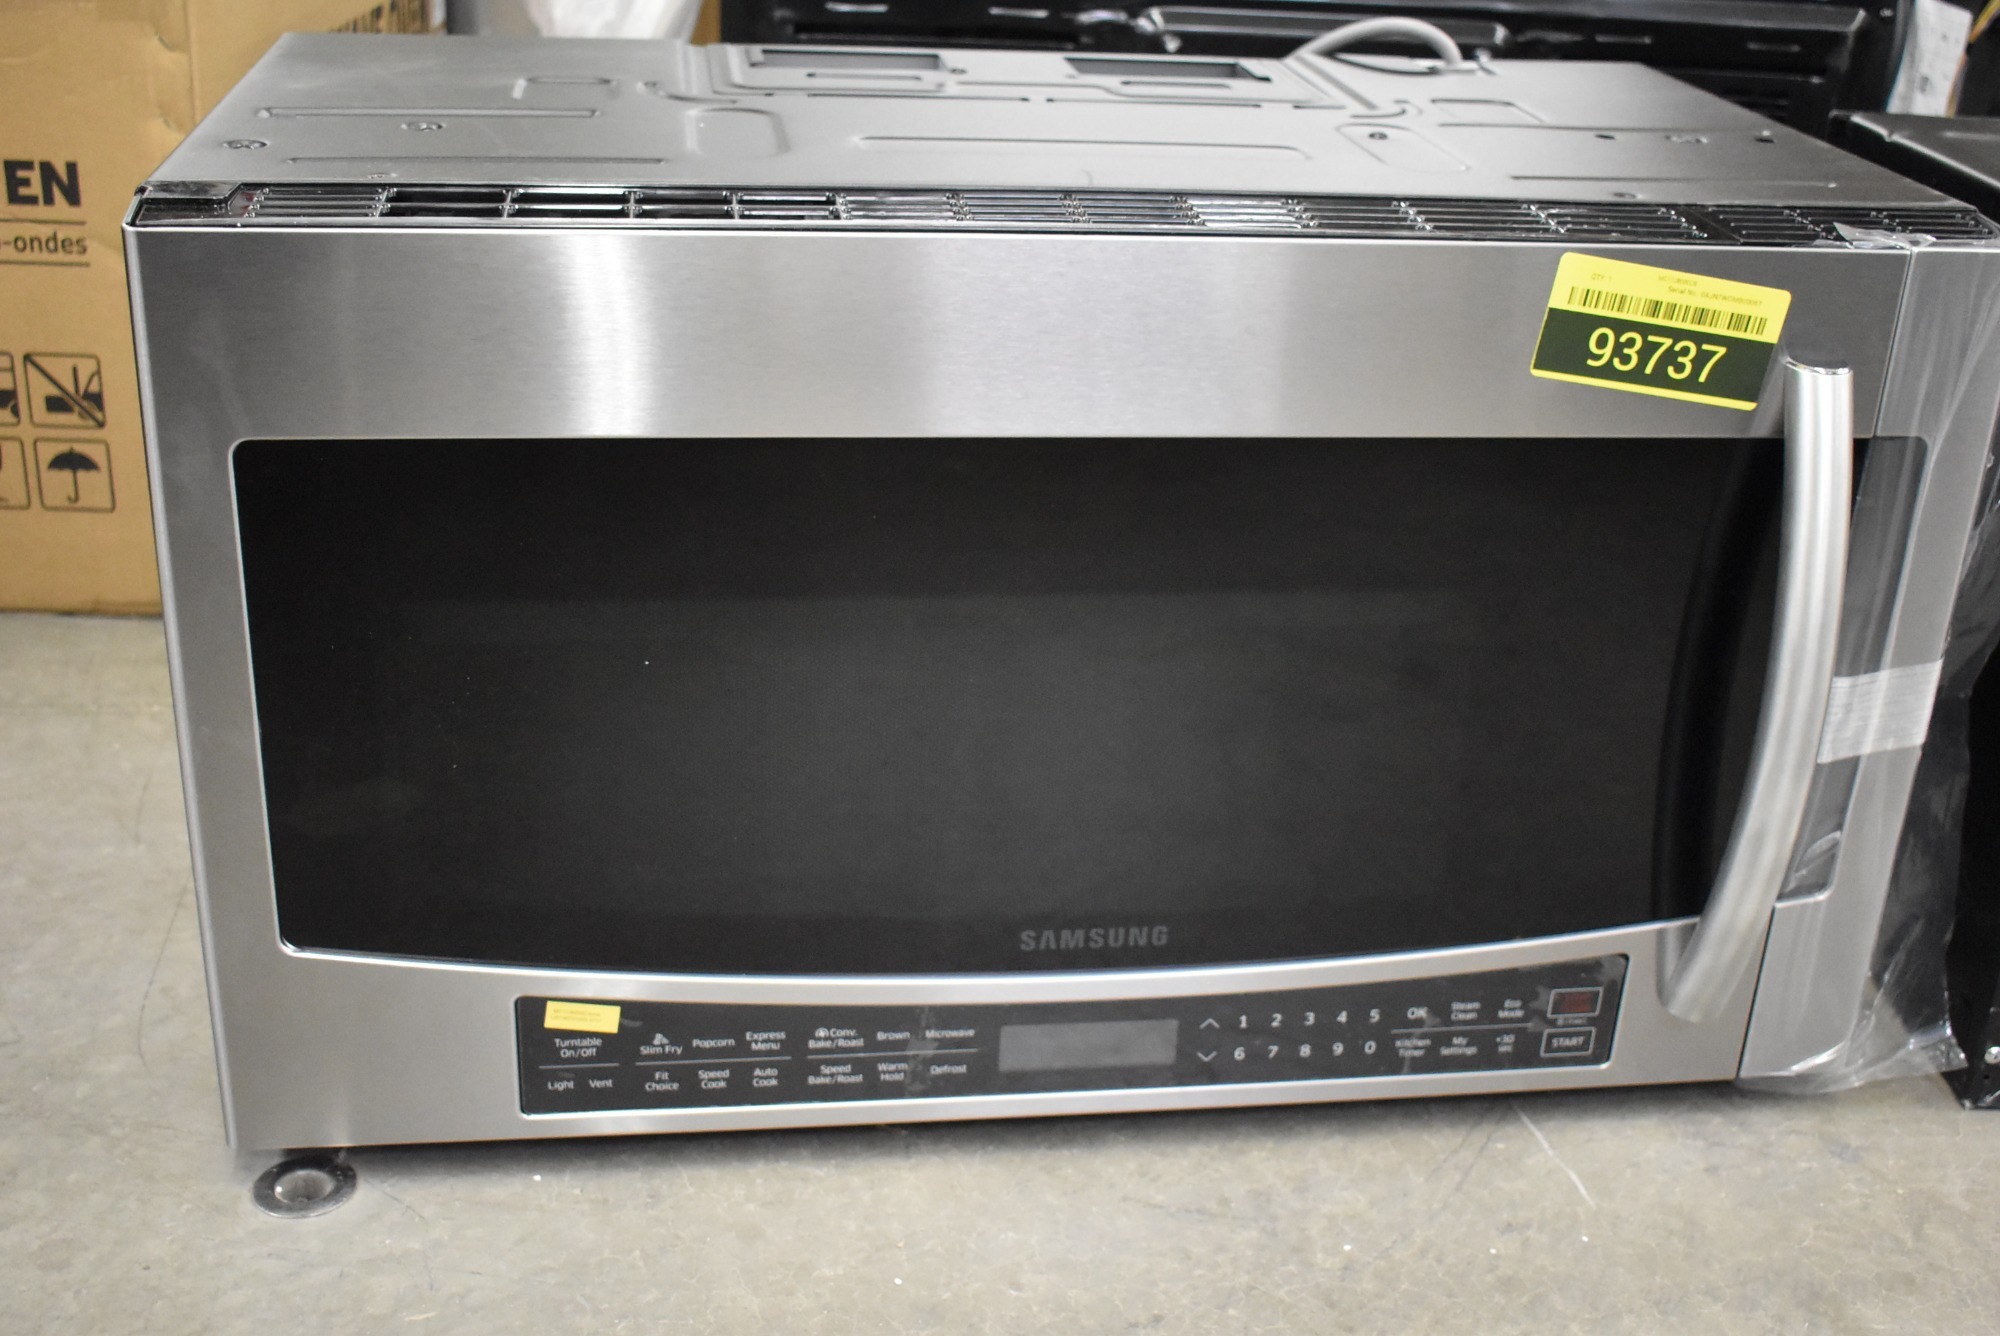 Samsung Mc17j8000cs 1 7 Cu Ft Over The Range Convection Microwave With 950 Watts 10 Power Levels 3 Speed 300 Cfm Venting System Slimfry Eco Mode Auto Defrost Ceramic Enamel Interior Eco Mode And Steam Clean